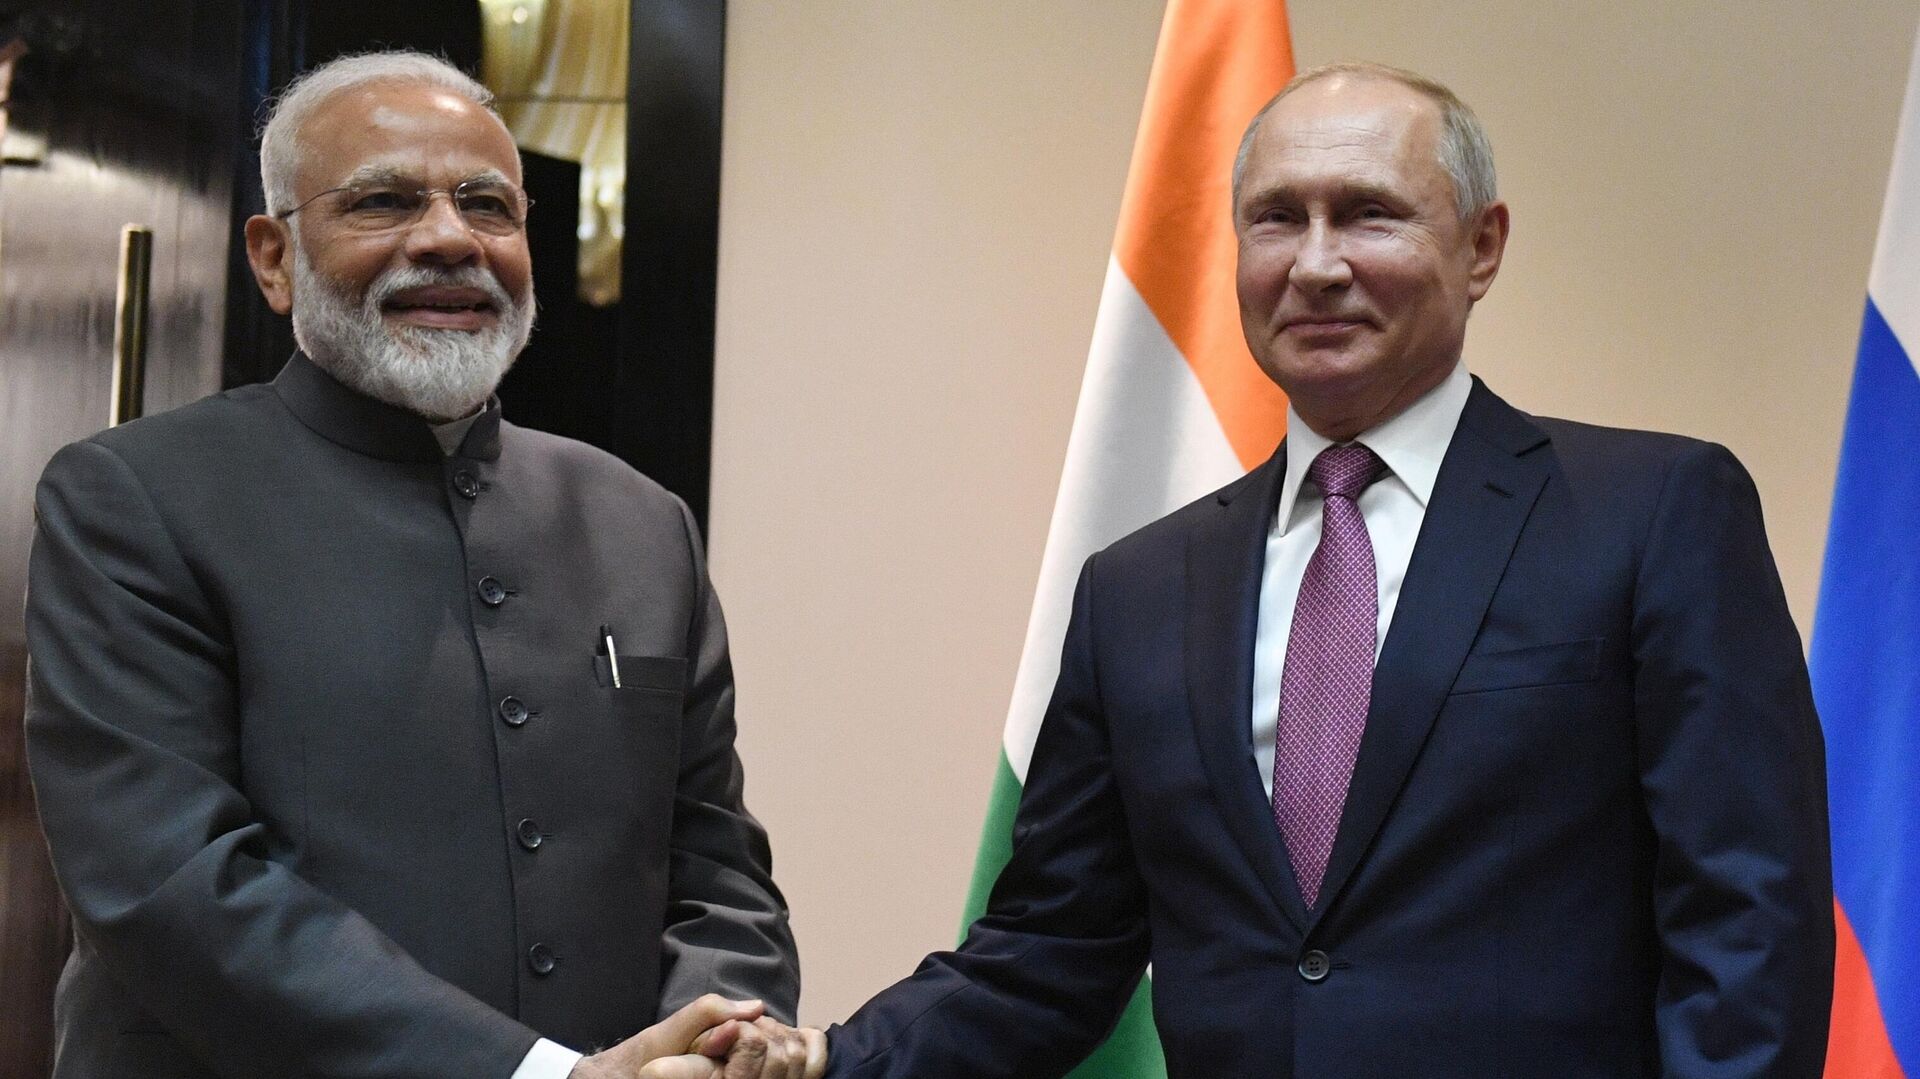 Russian President Vladimir Putin, right, and Indian Prime Minister Narendra Modi pose for a photo prior to their talks on a sideline of the Shanghai Cooperation Organization summit in Bishkek, Kyrgyzstan, June 13, 2019 - Sputnik भारत, 1920, 12.10.2023